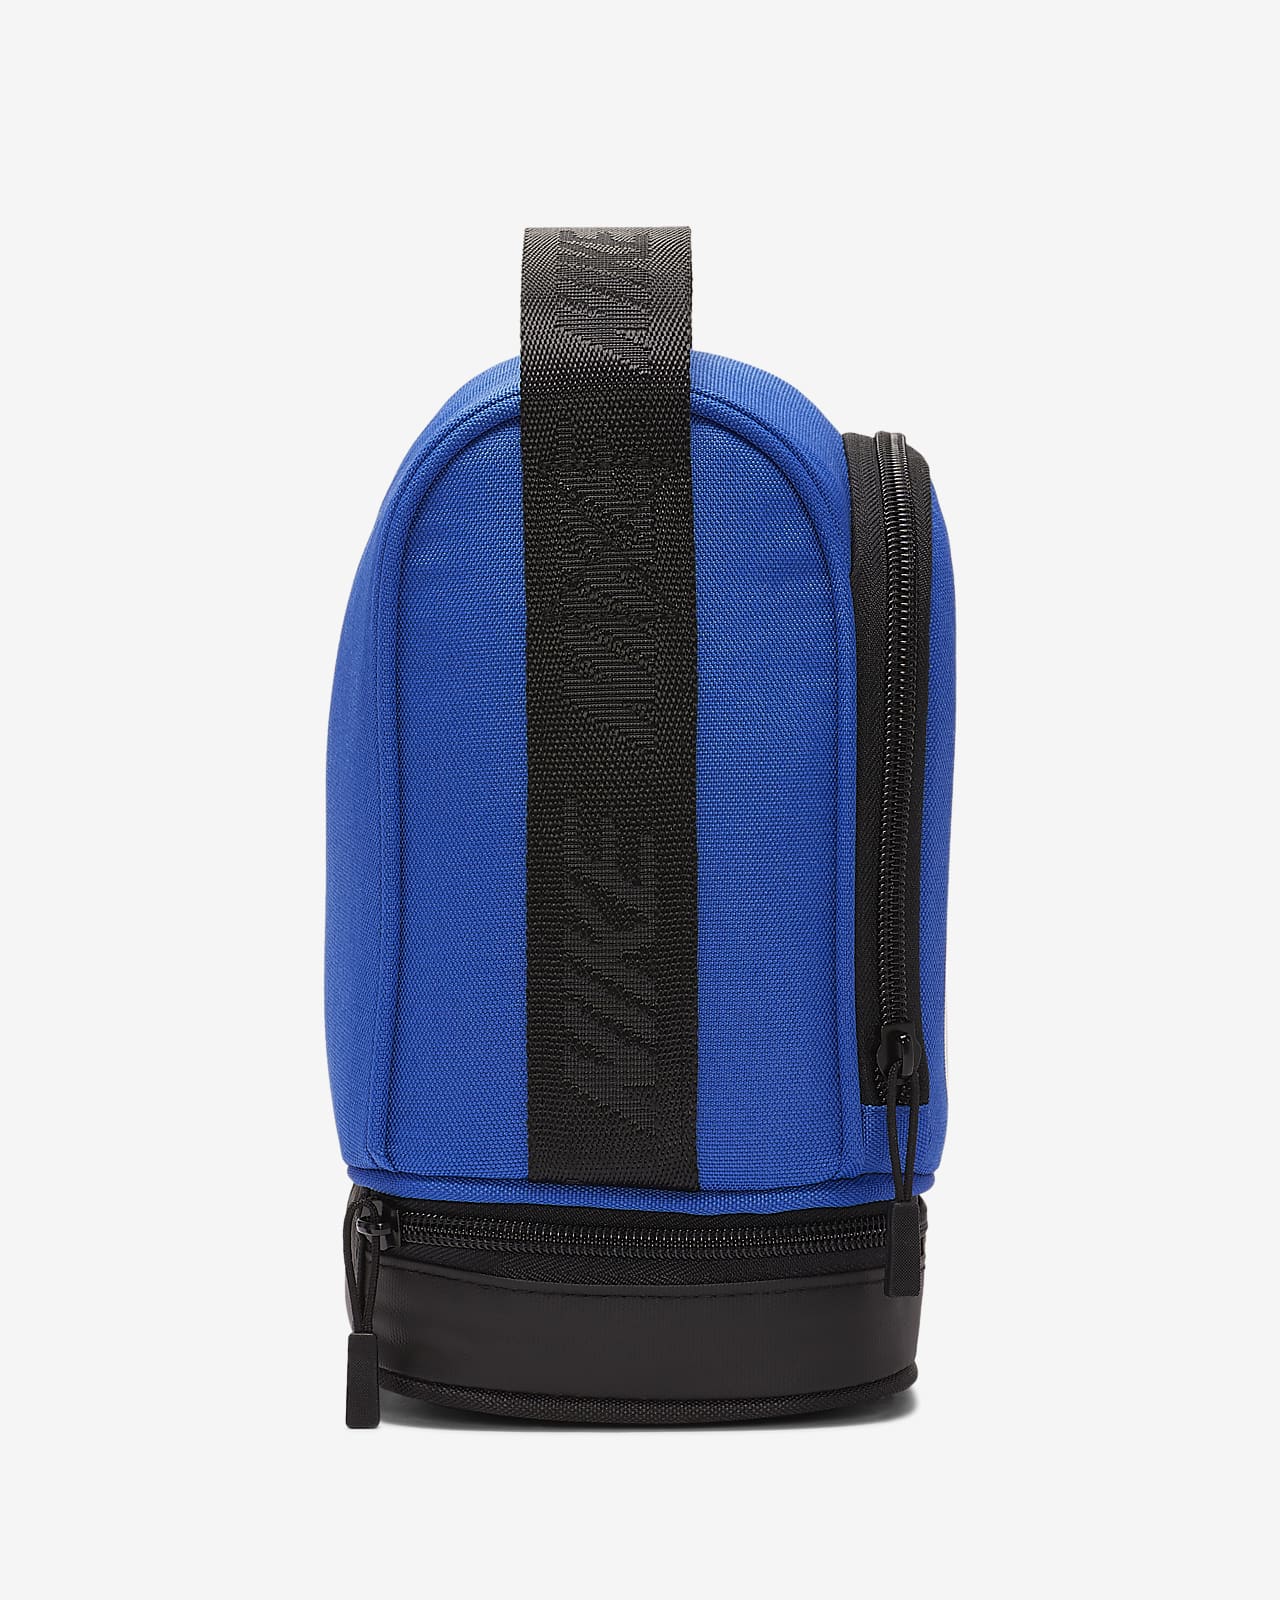 nike fuel pack 2.0 lunch tote